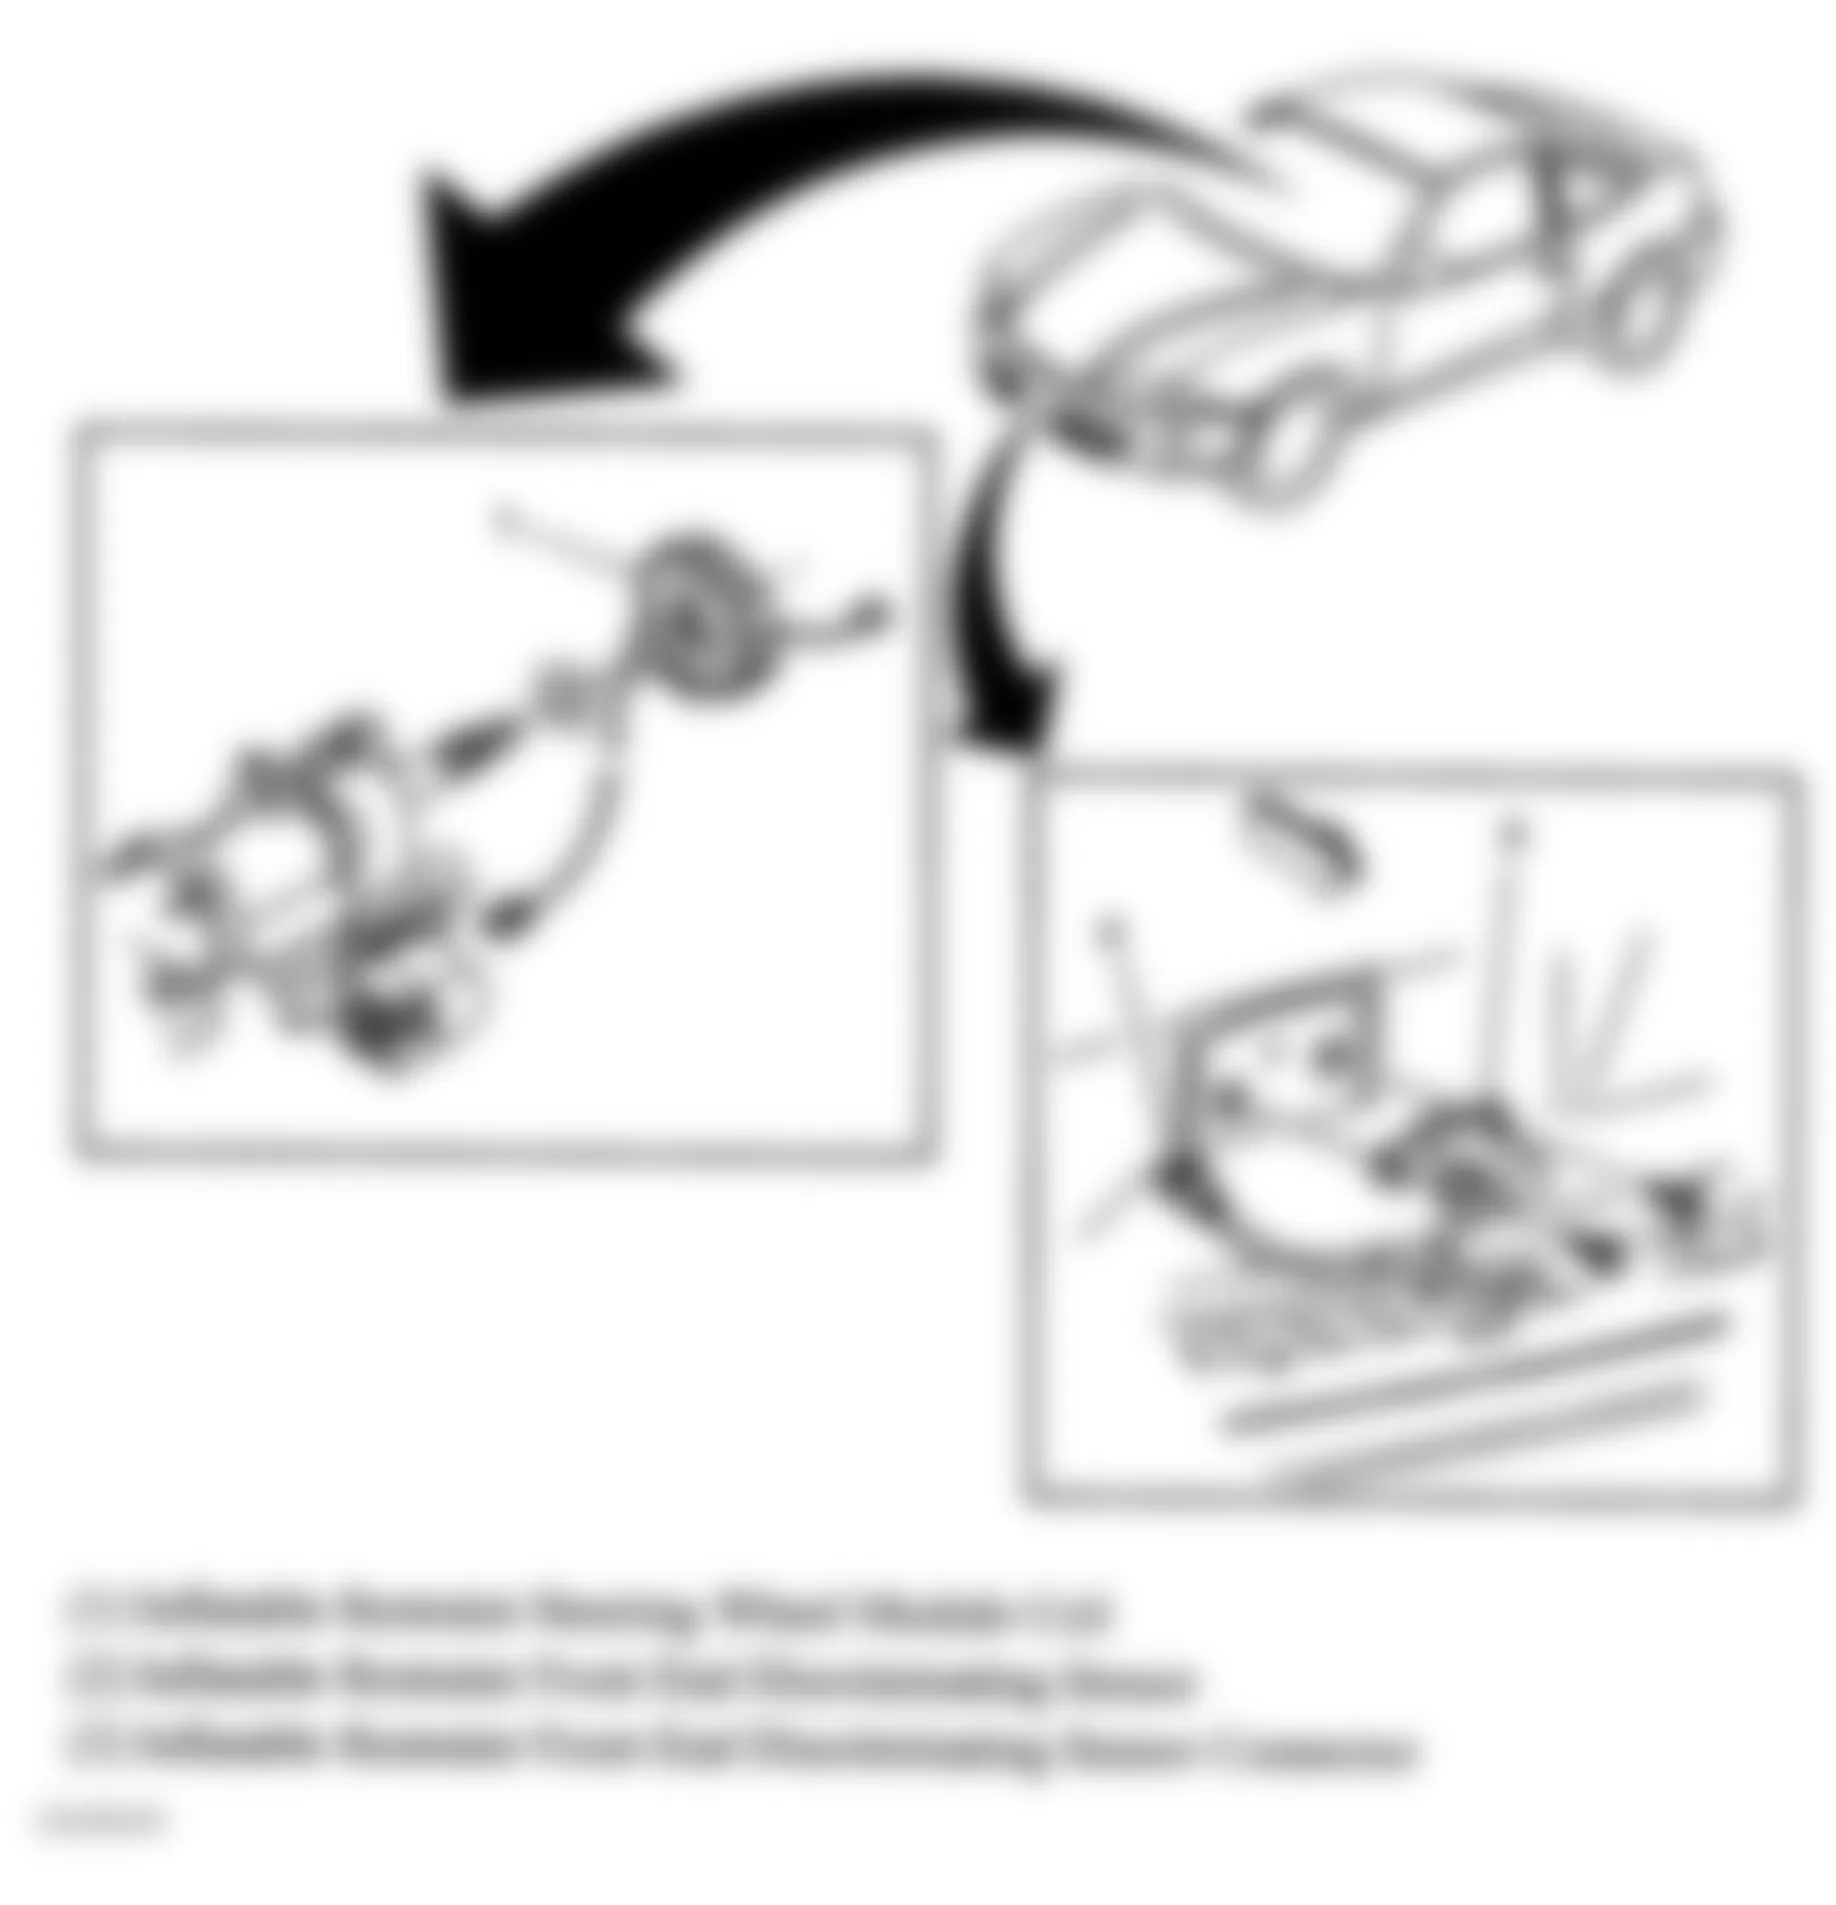 Chevrolet Cavalier 2005 - Component Locations -  Center Of Front Bumper & Top Of Steering Column